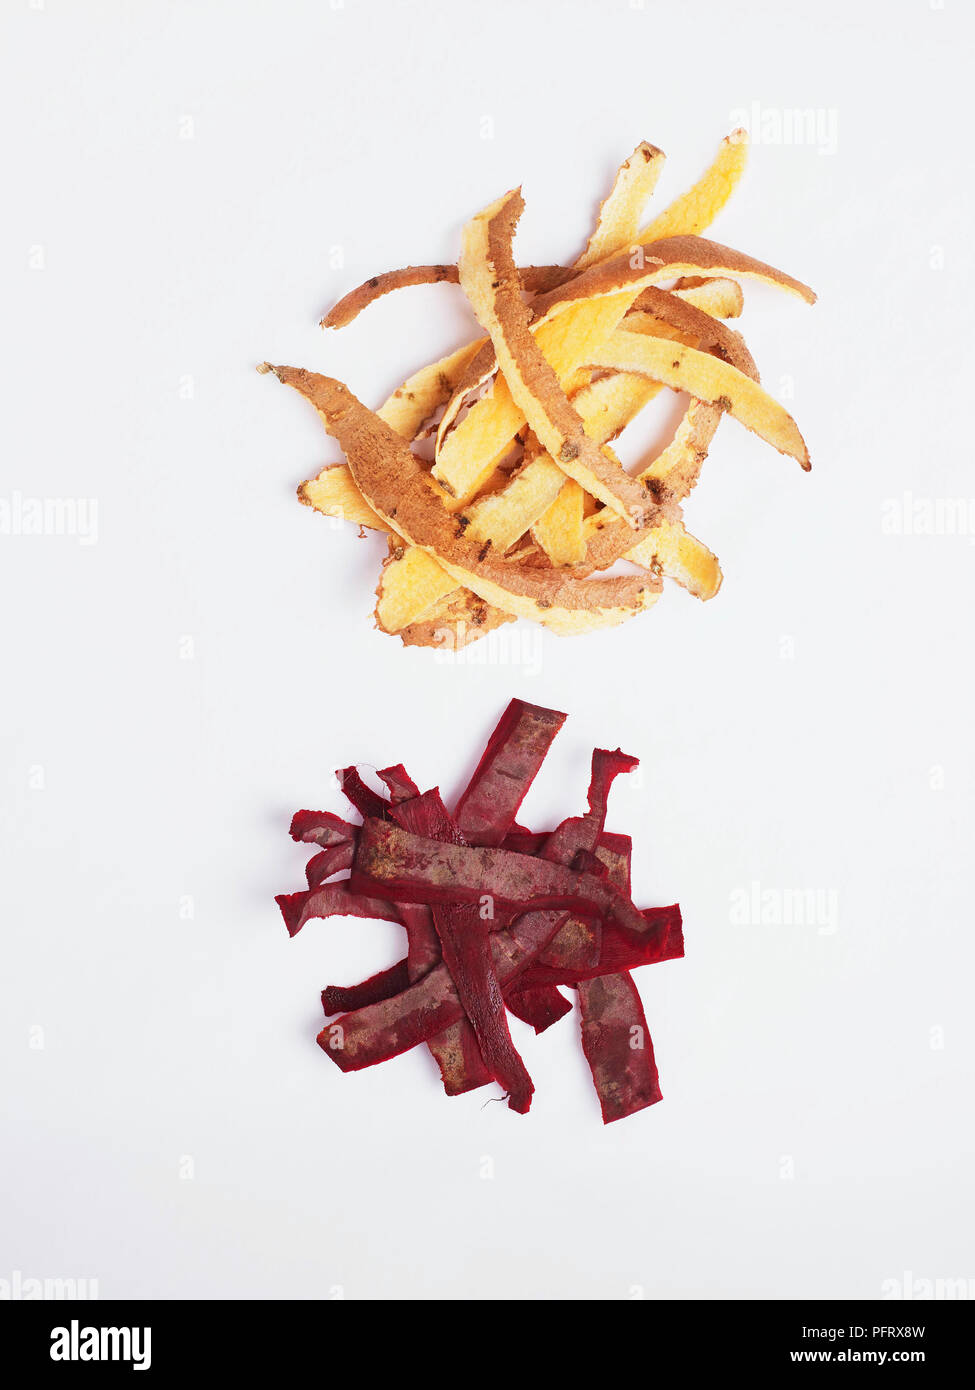 Piles of sweet potato and beetroot peel on a white background Stock Photo